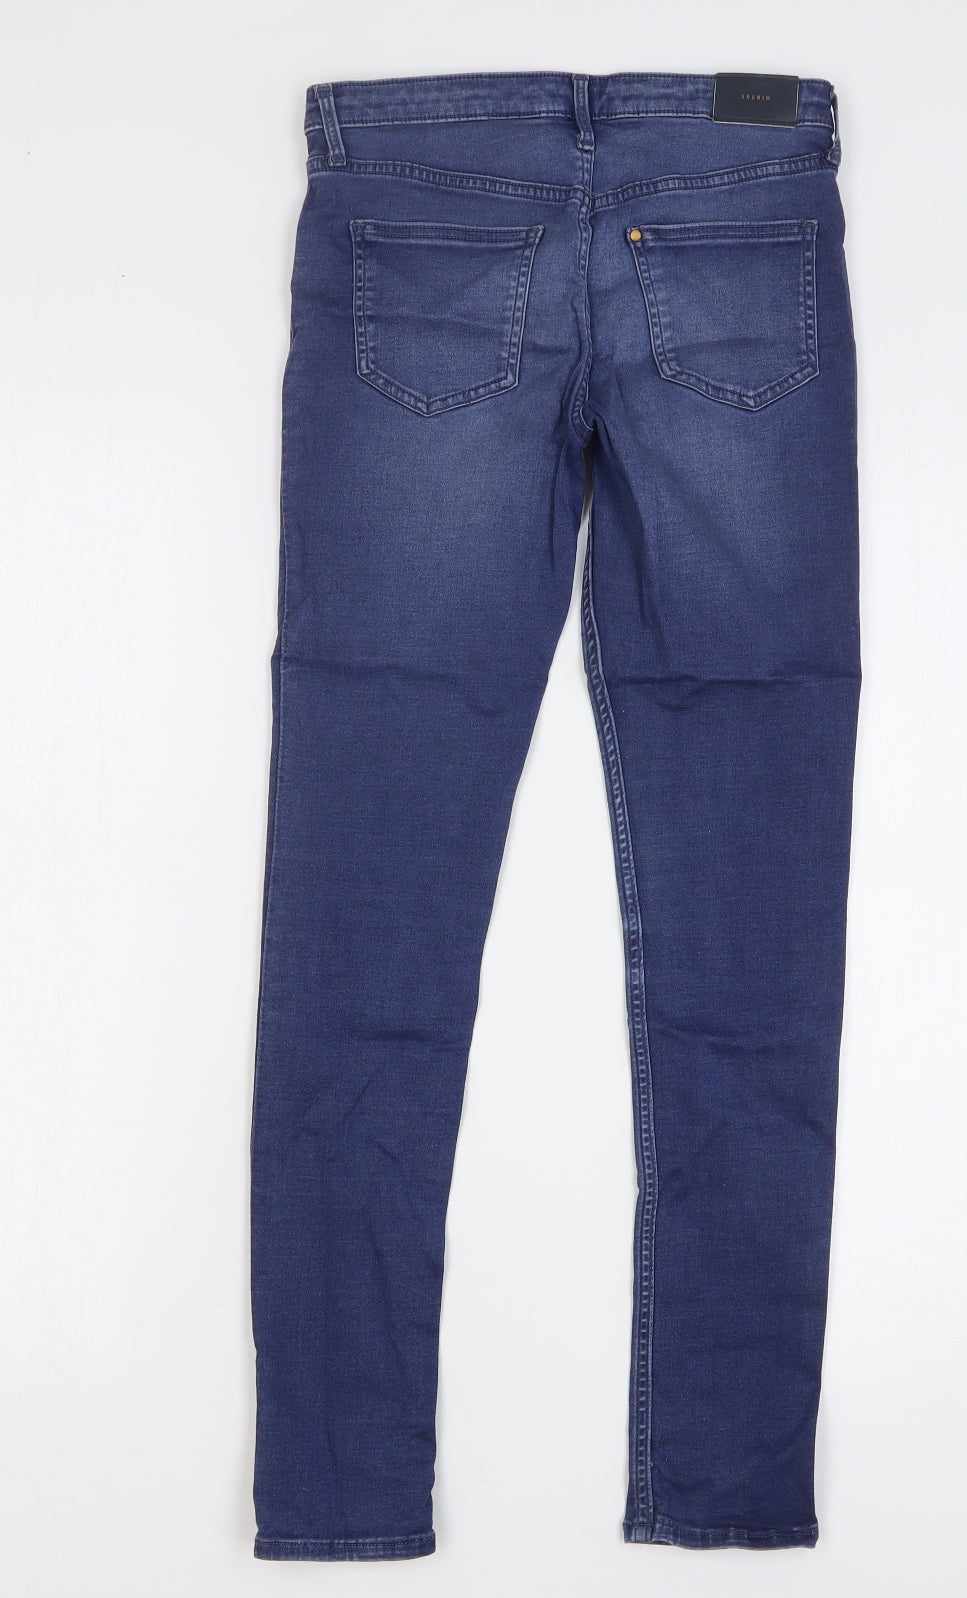 H&M Girls Blue Cotton Skinny Jeans Size 12-13 Years Regular Button